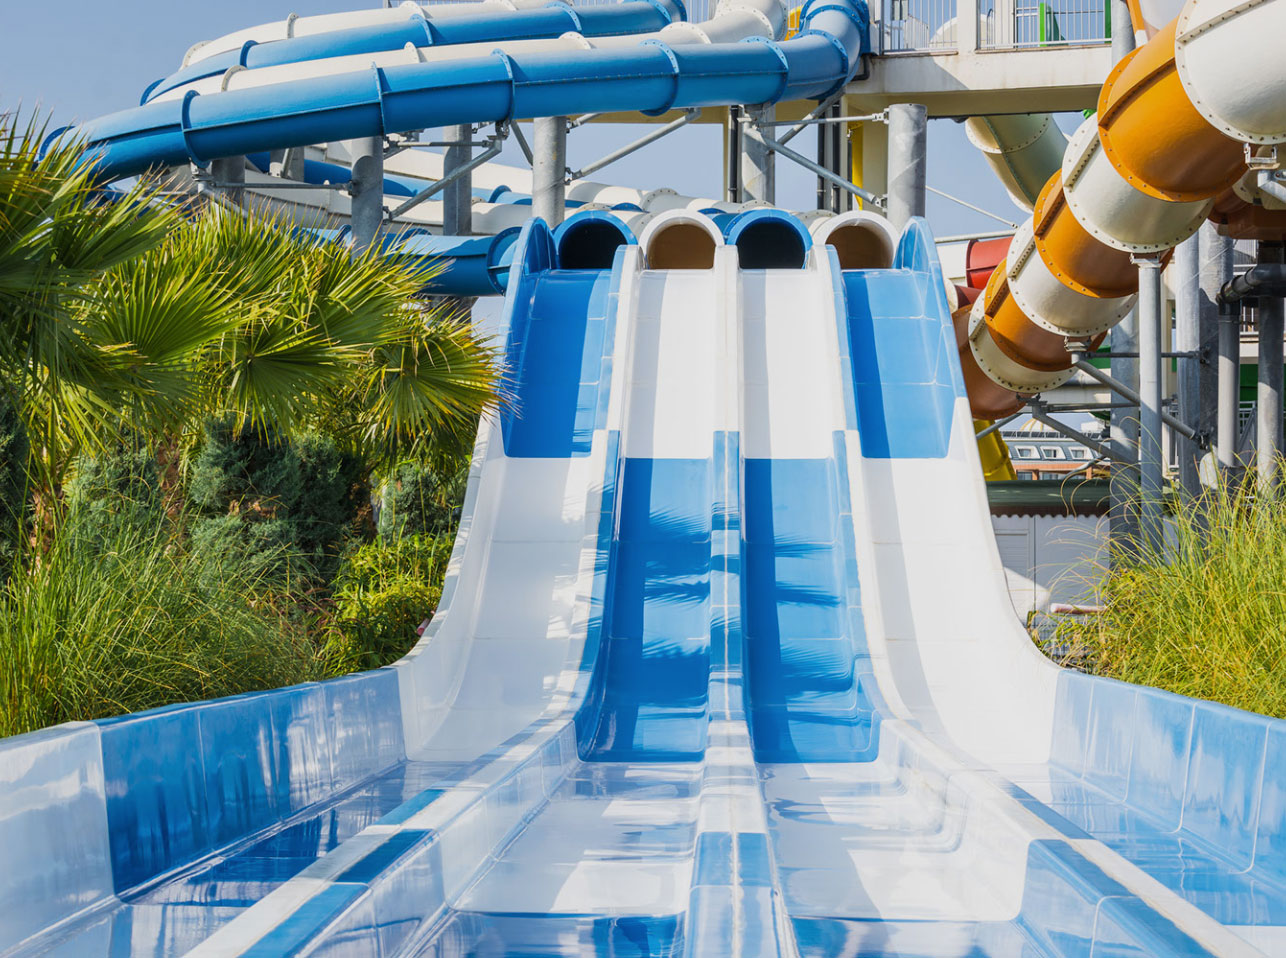 Second Home in Orlando - Water Slides at Spectrum+